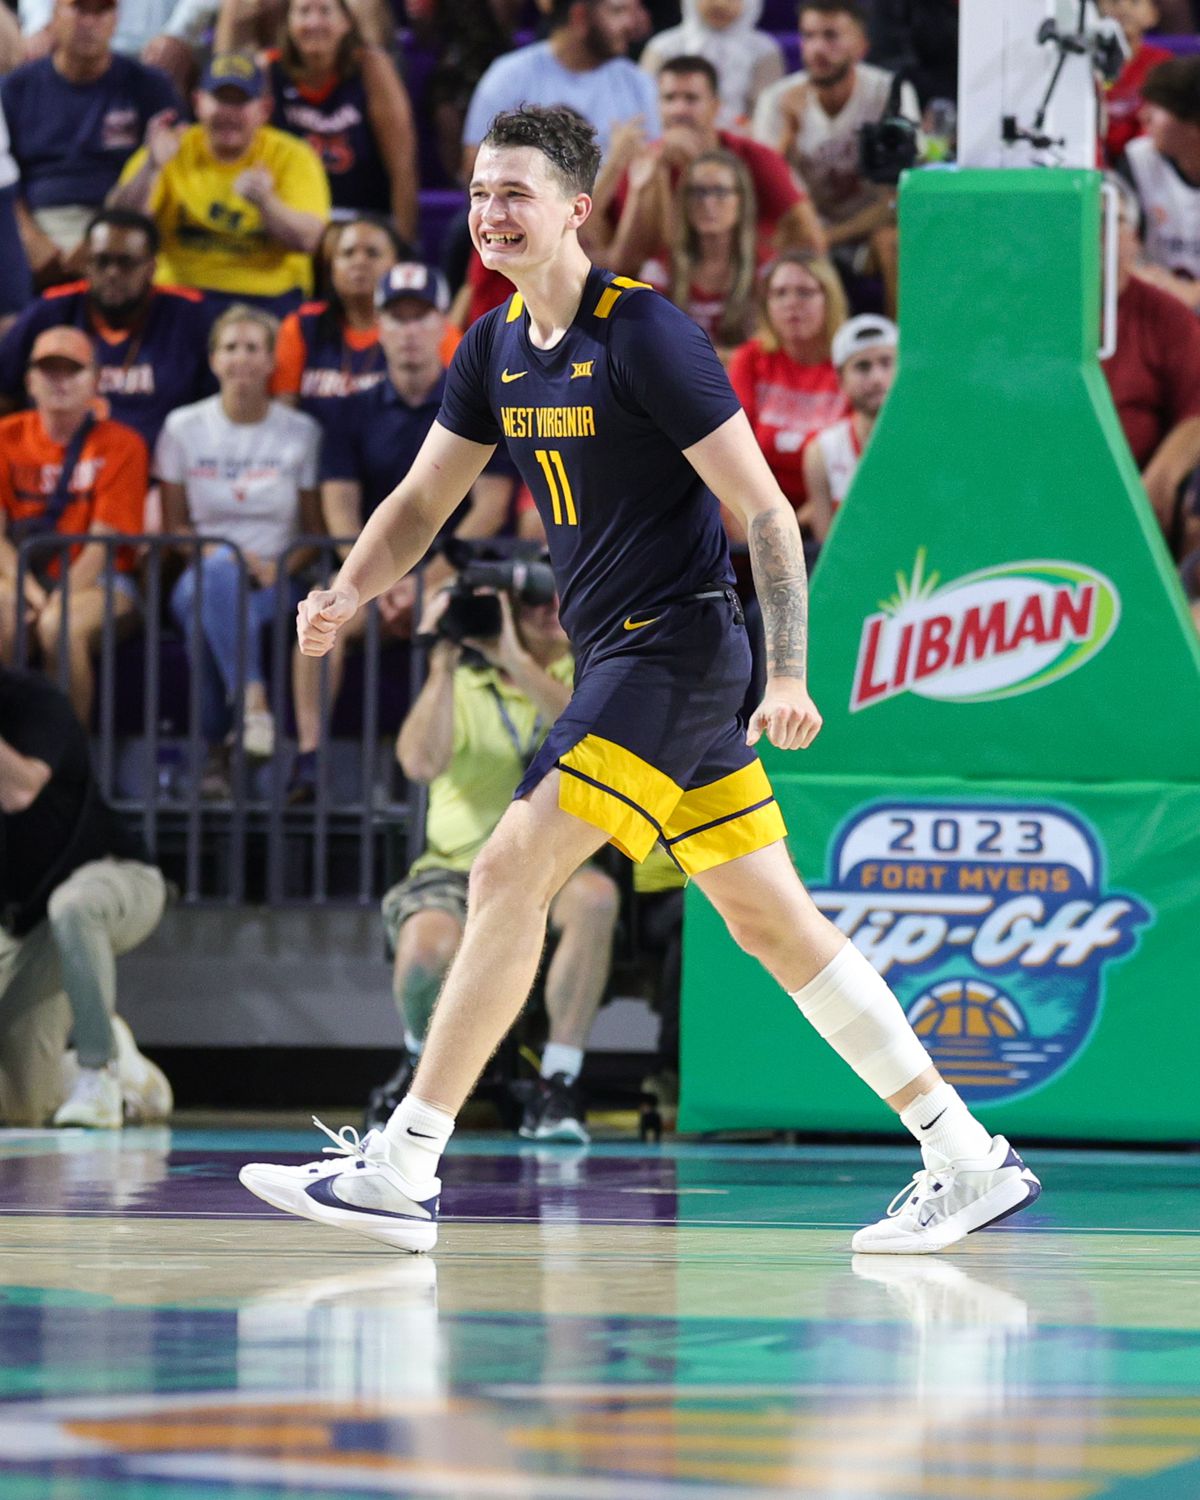 West Virginia Mountaineers forward Quinn Slazinski (11) reacts after a play against the Virginia Cavaliers in the second half during the Fort Myers Tip-Off third place game at Suncoast Credit Union Arena